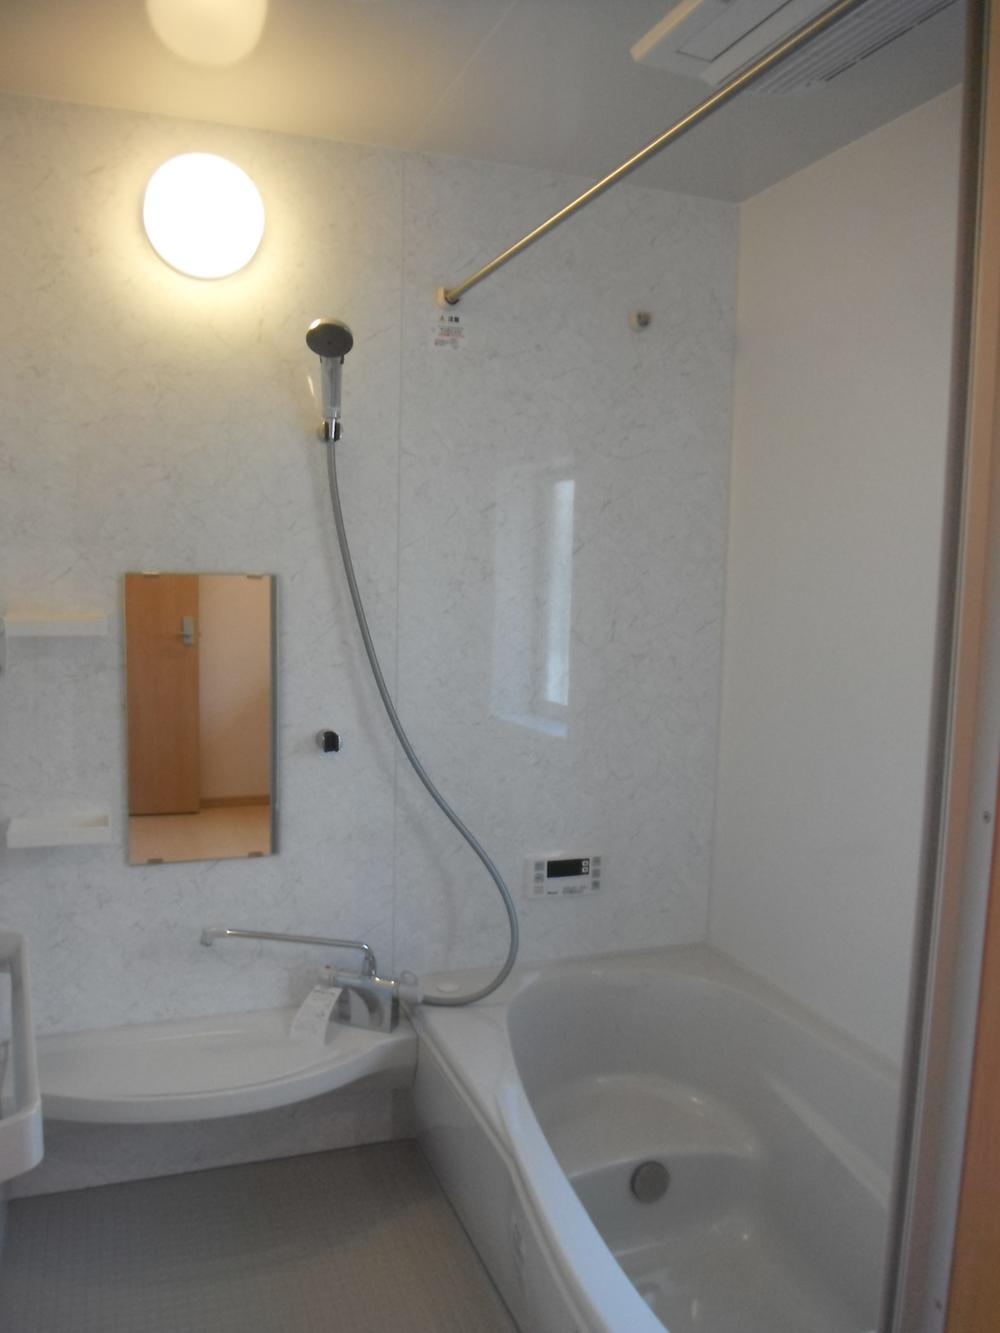 Same specifications photo (bathroom). System bus with a bathroom heating dryer <is a complete image>